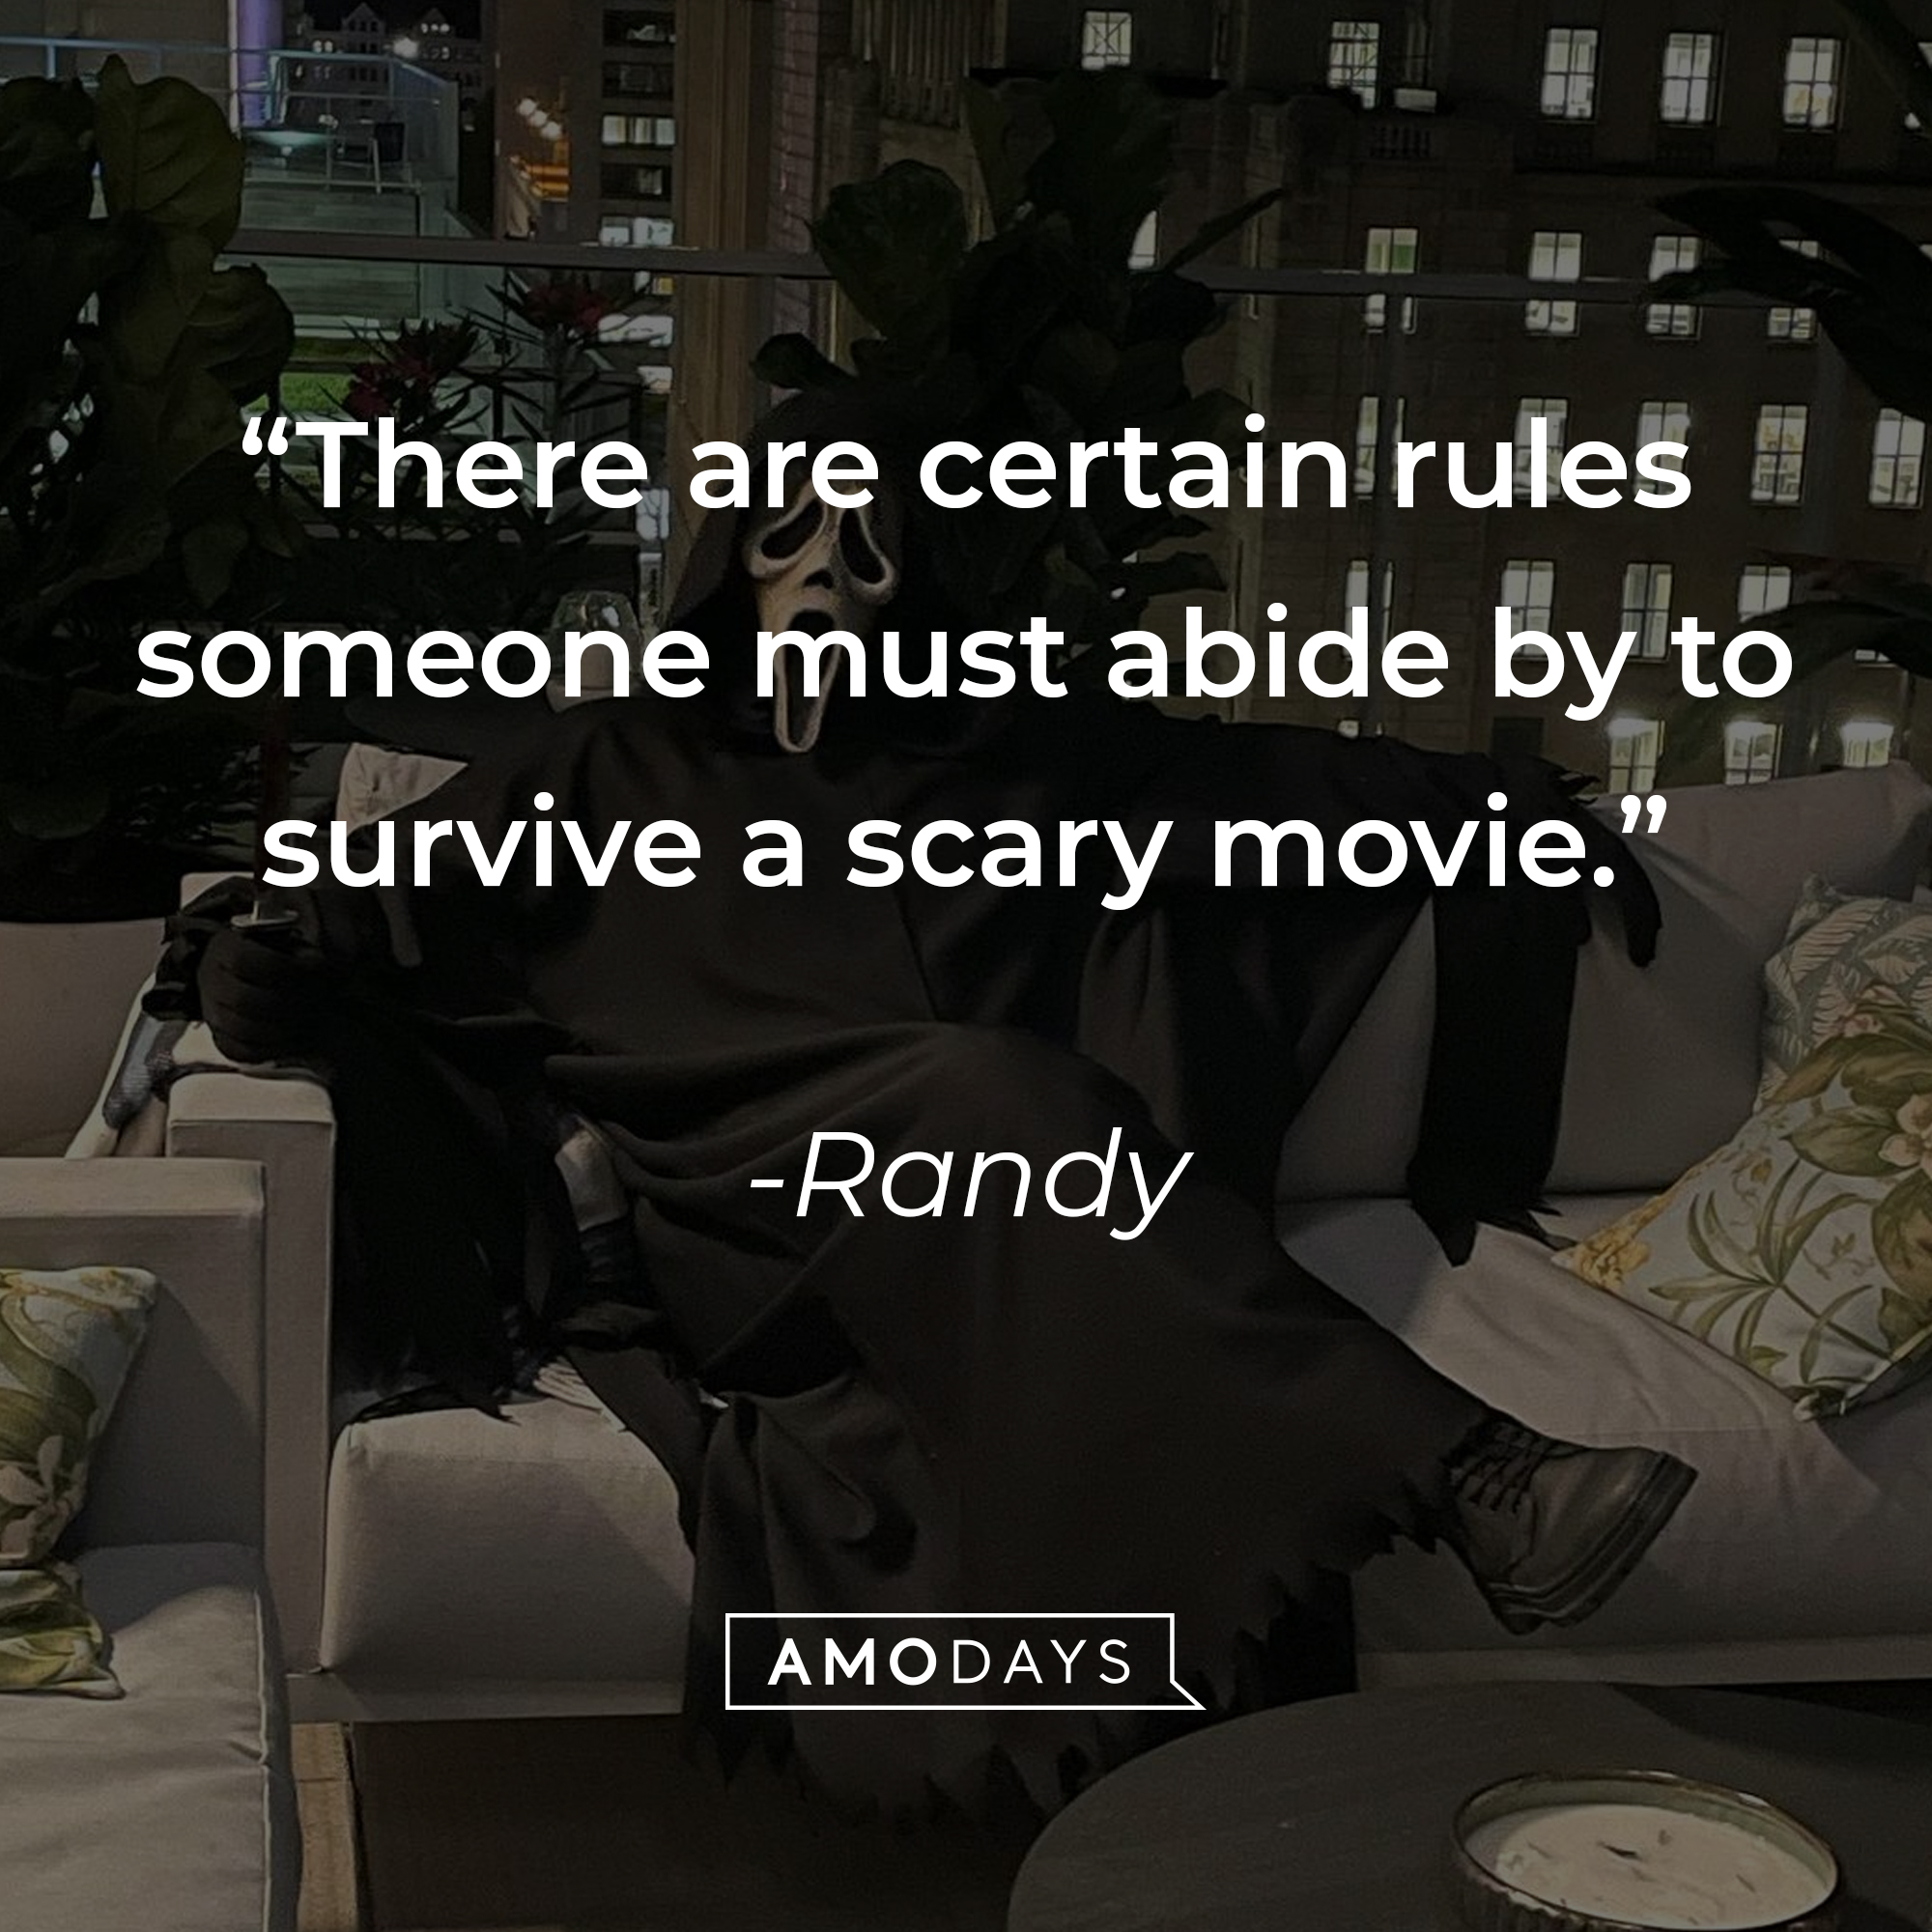 Ghostface with the quote, "There are certain rules someone must abide by to survive a scary movie." | Source: Facebook/ScreamMovies